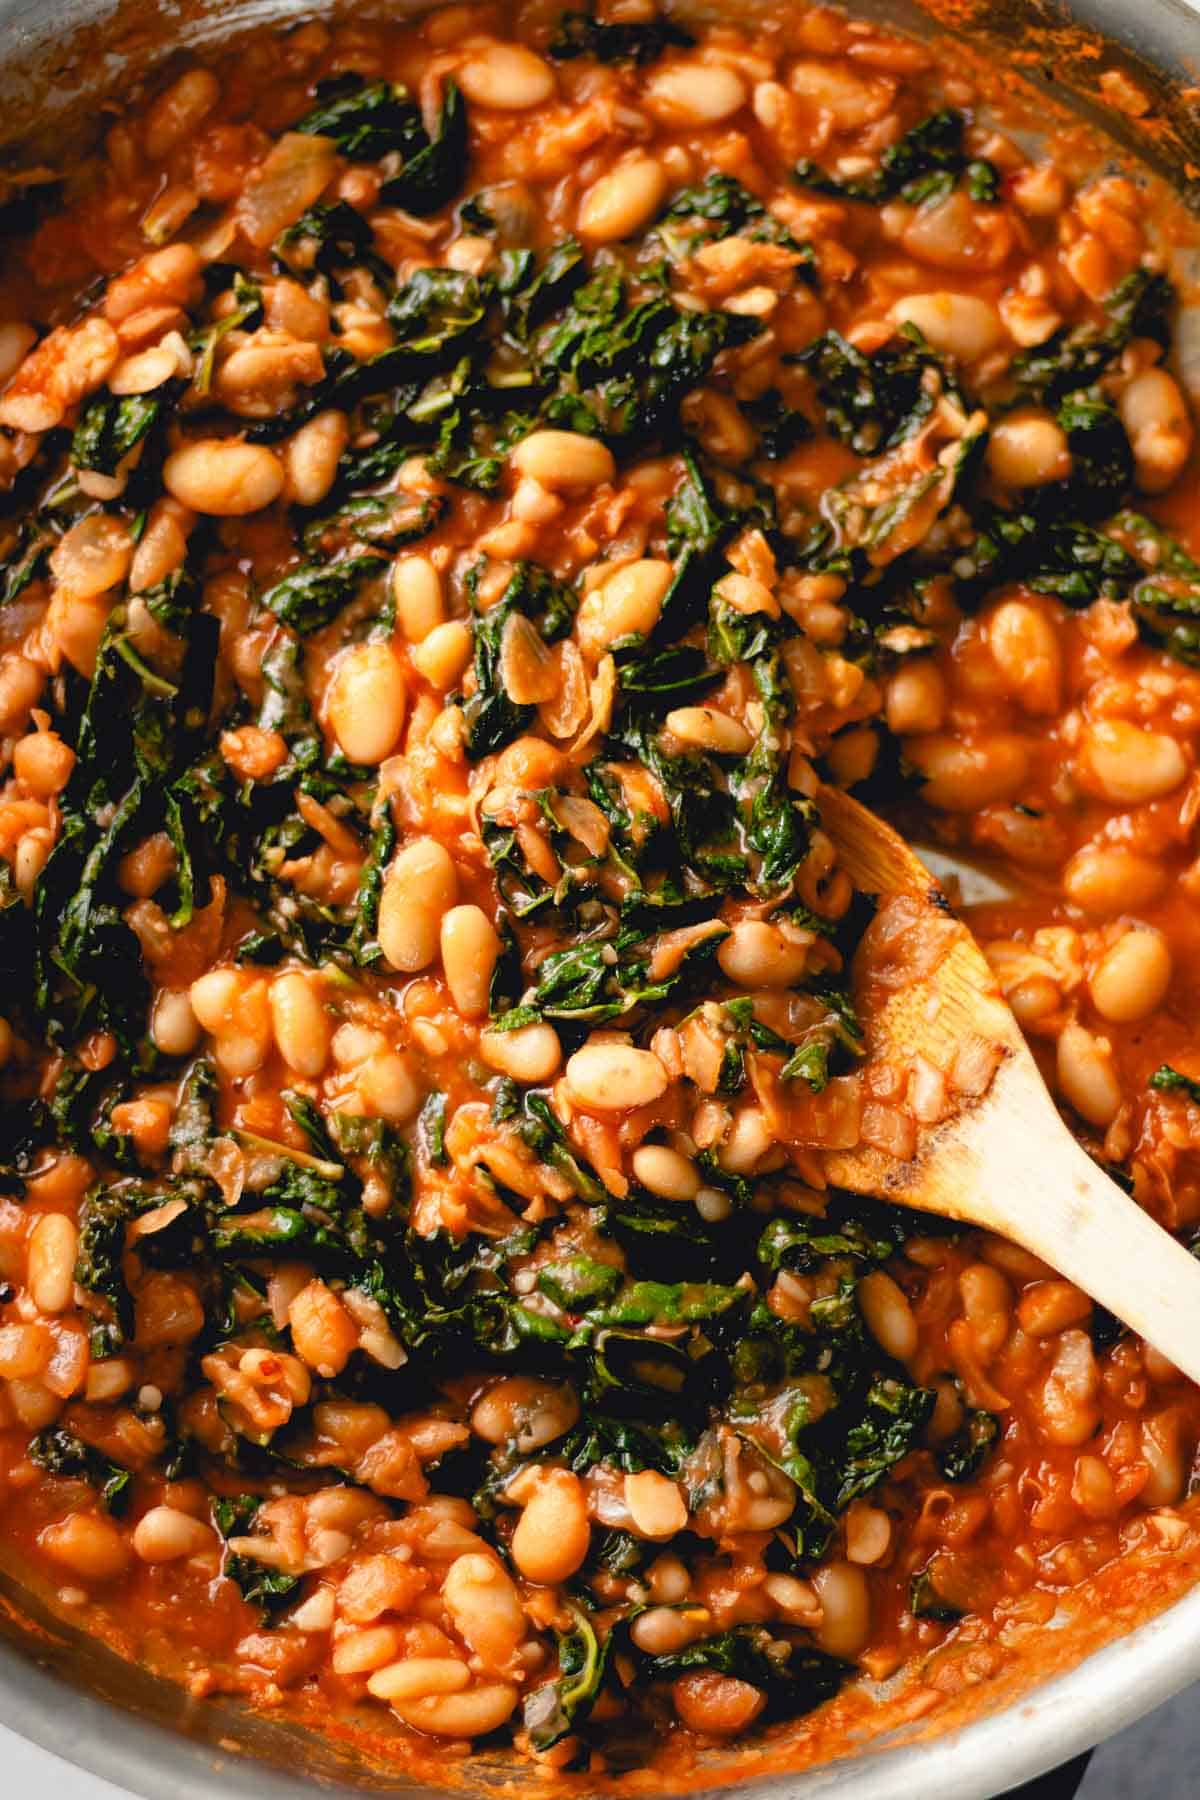 White beans and kale with tomato sauce in a skillet being stirred with a wooden spoon.